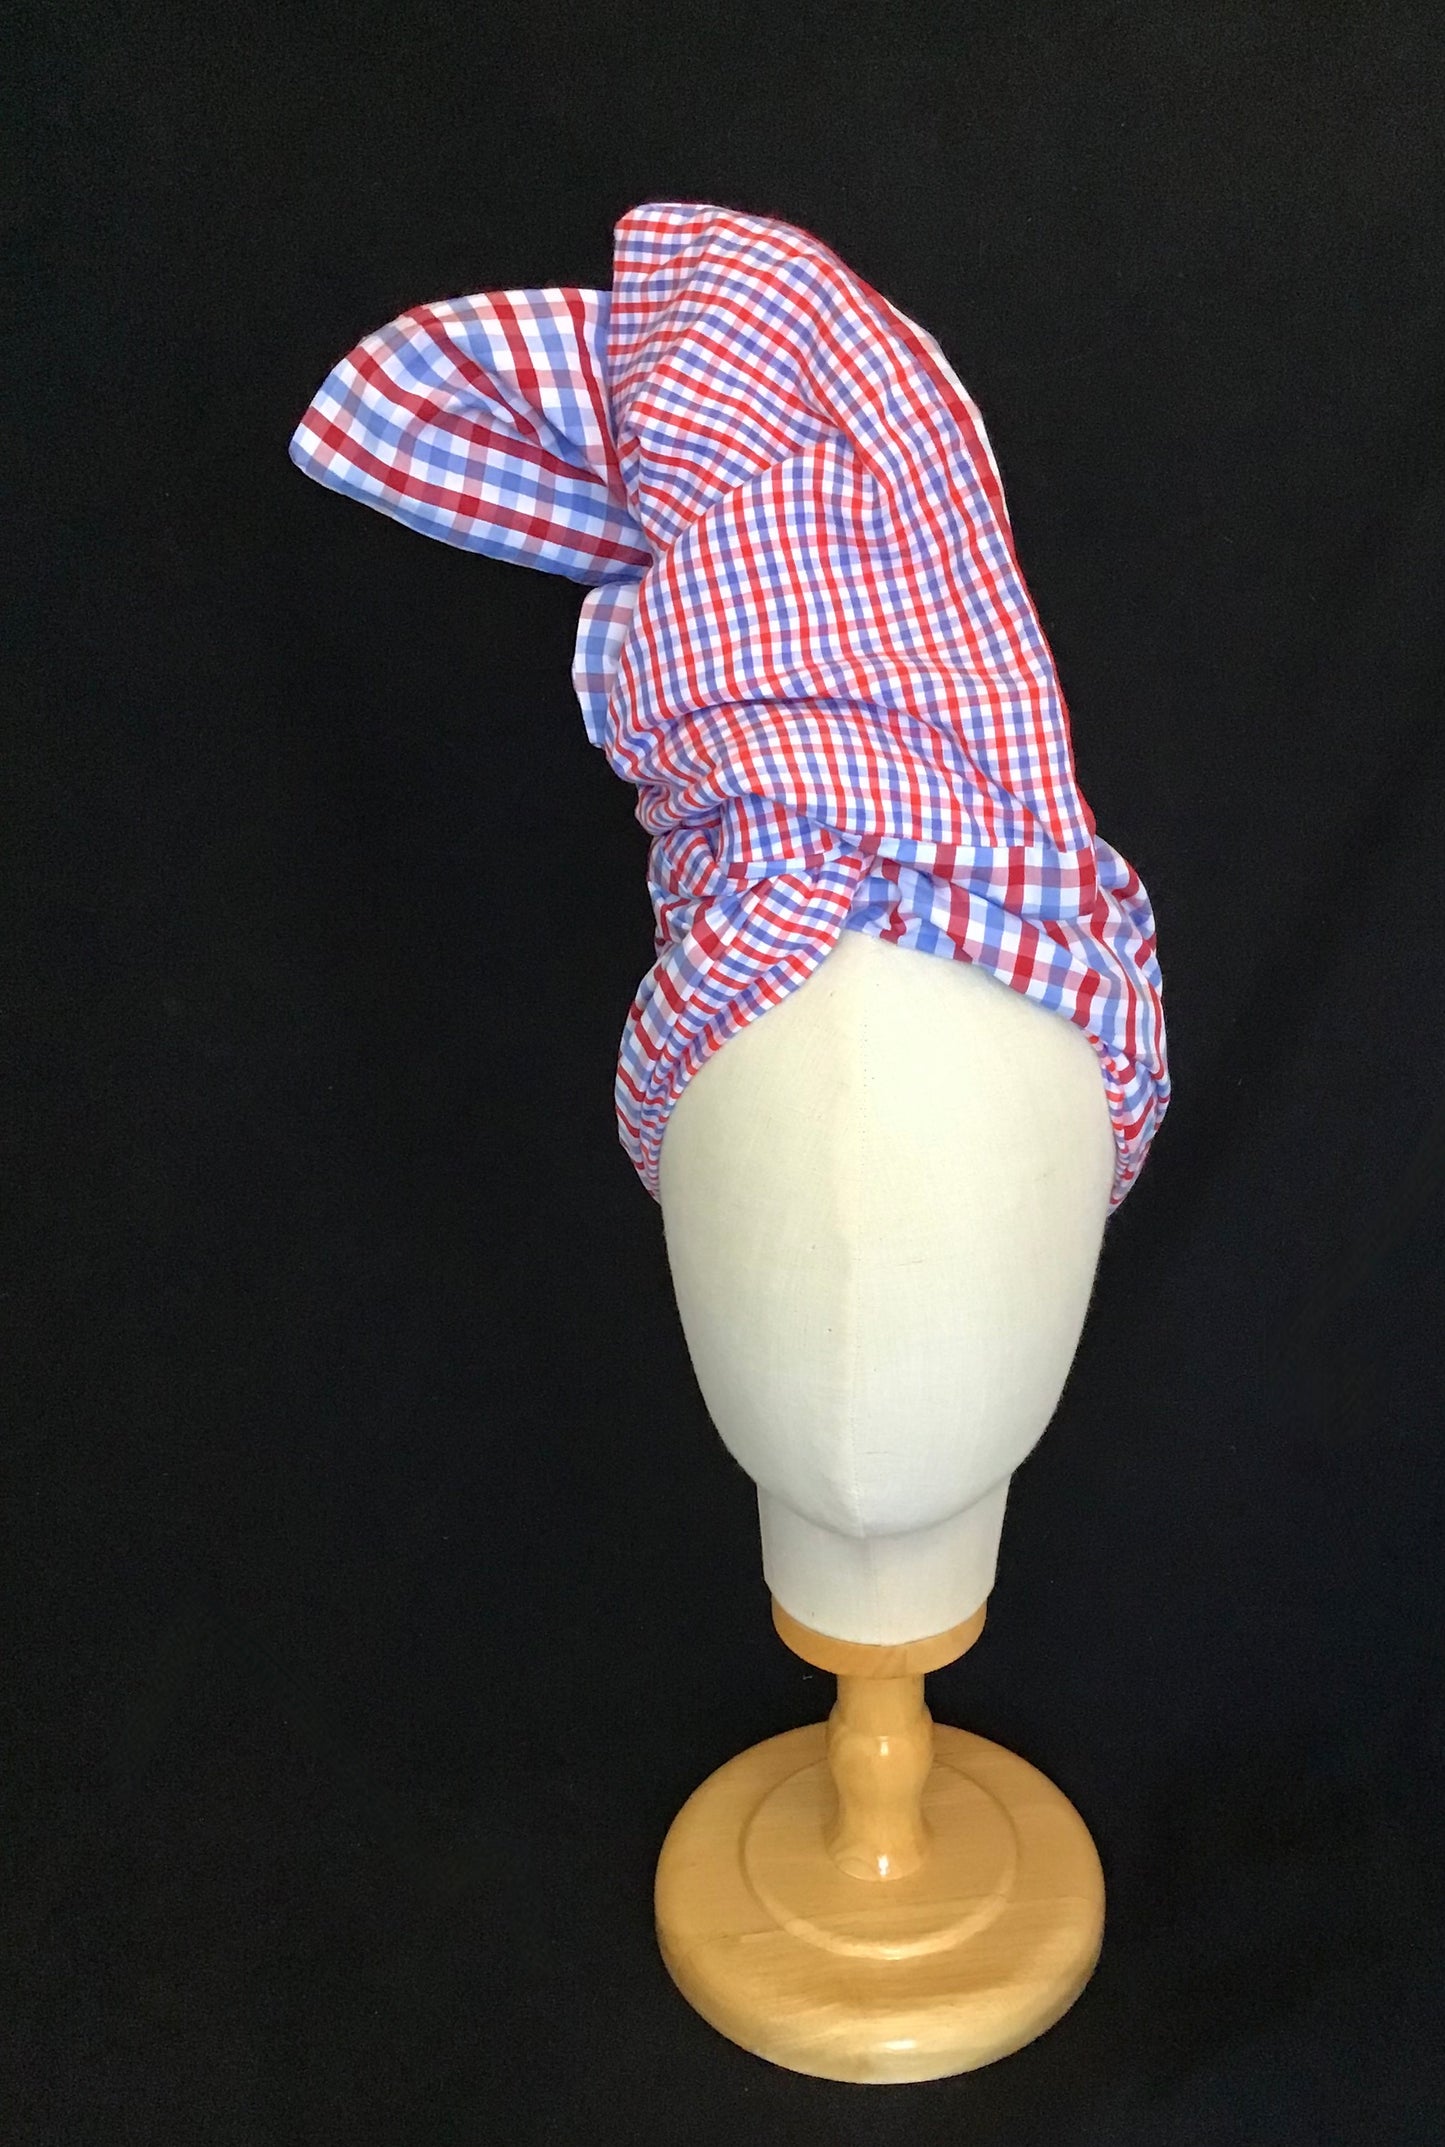 Cotton Shirting in red white blue plaid mix